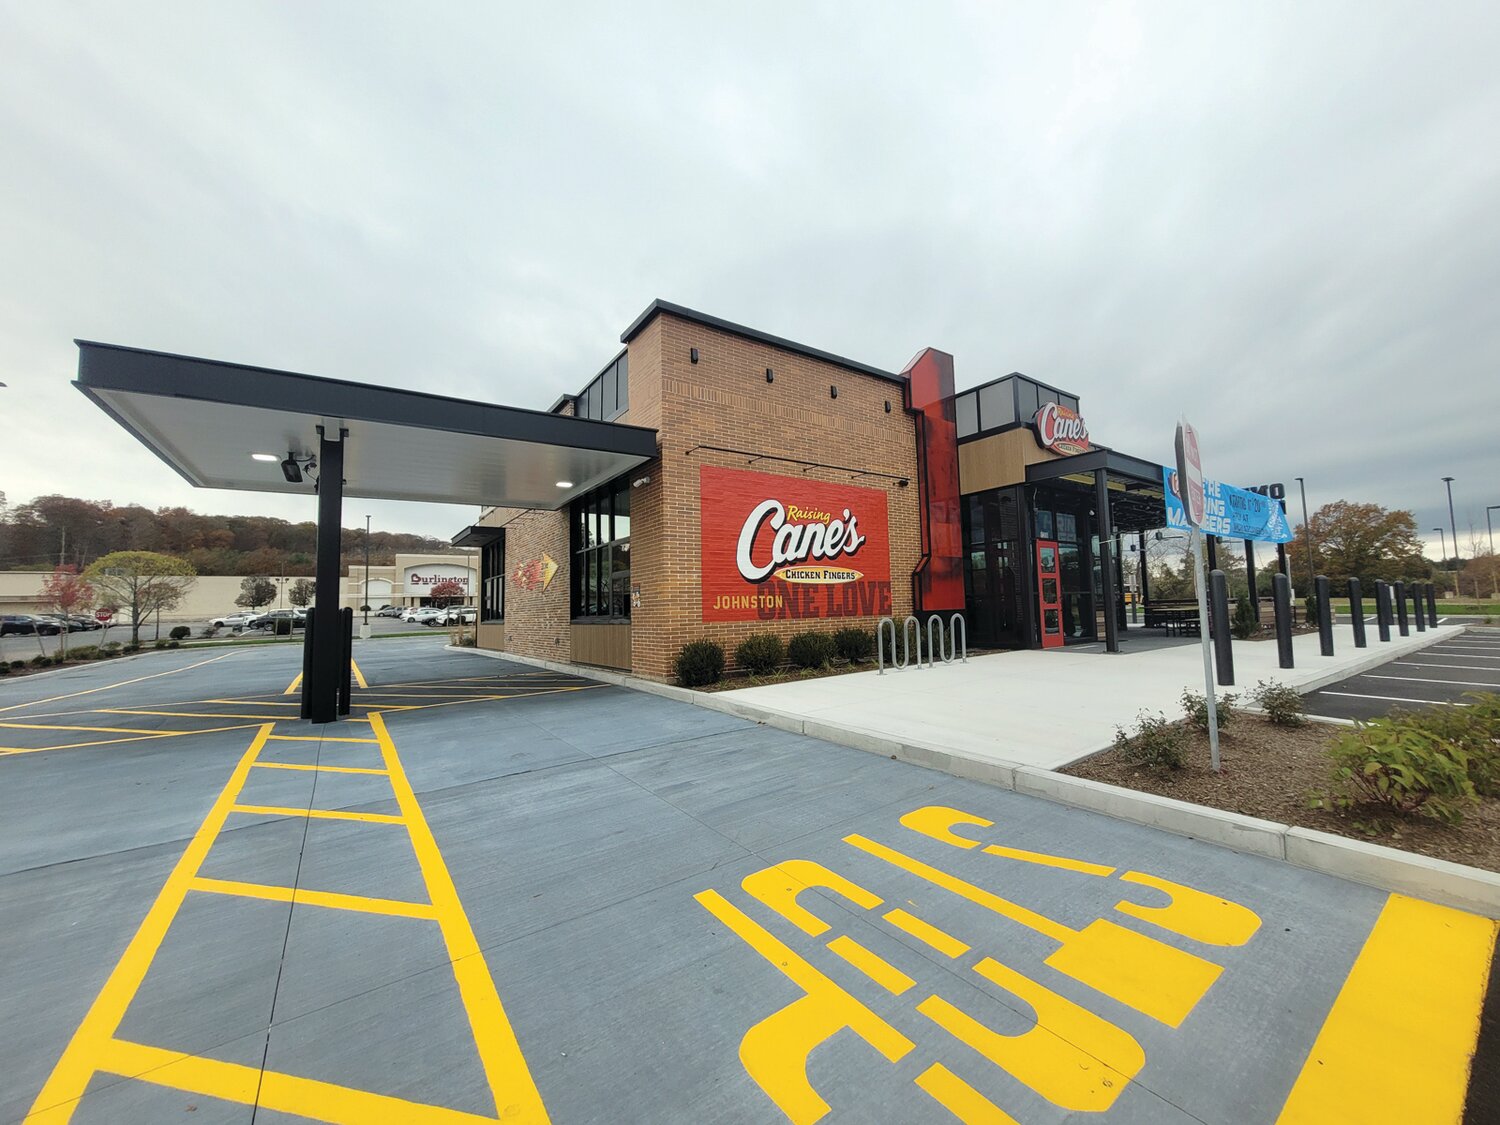 WATCH OUT ABEL: Raising Canes expects to open its new Johnston location in early January 2024. They’ve promised the first 20 guests “Free Canes for a Year.”